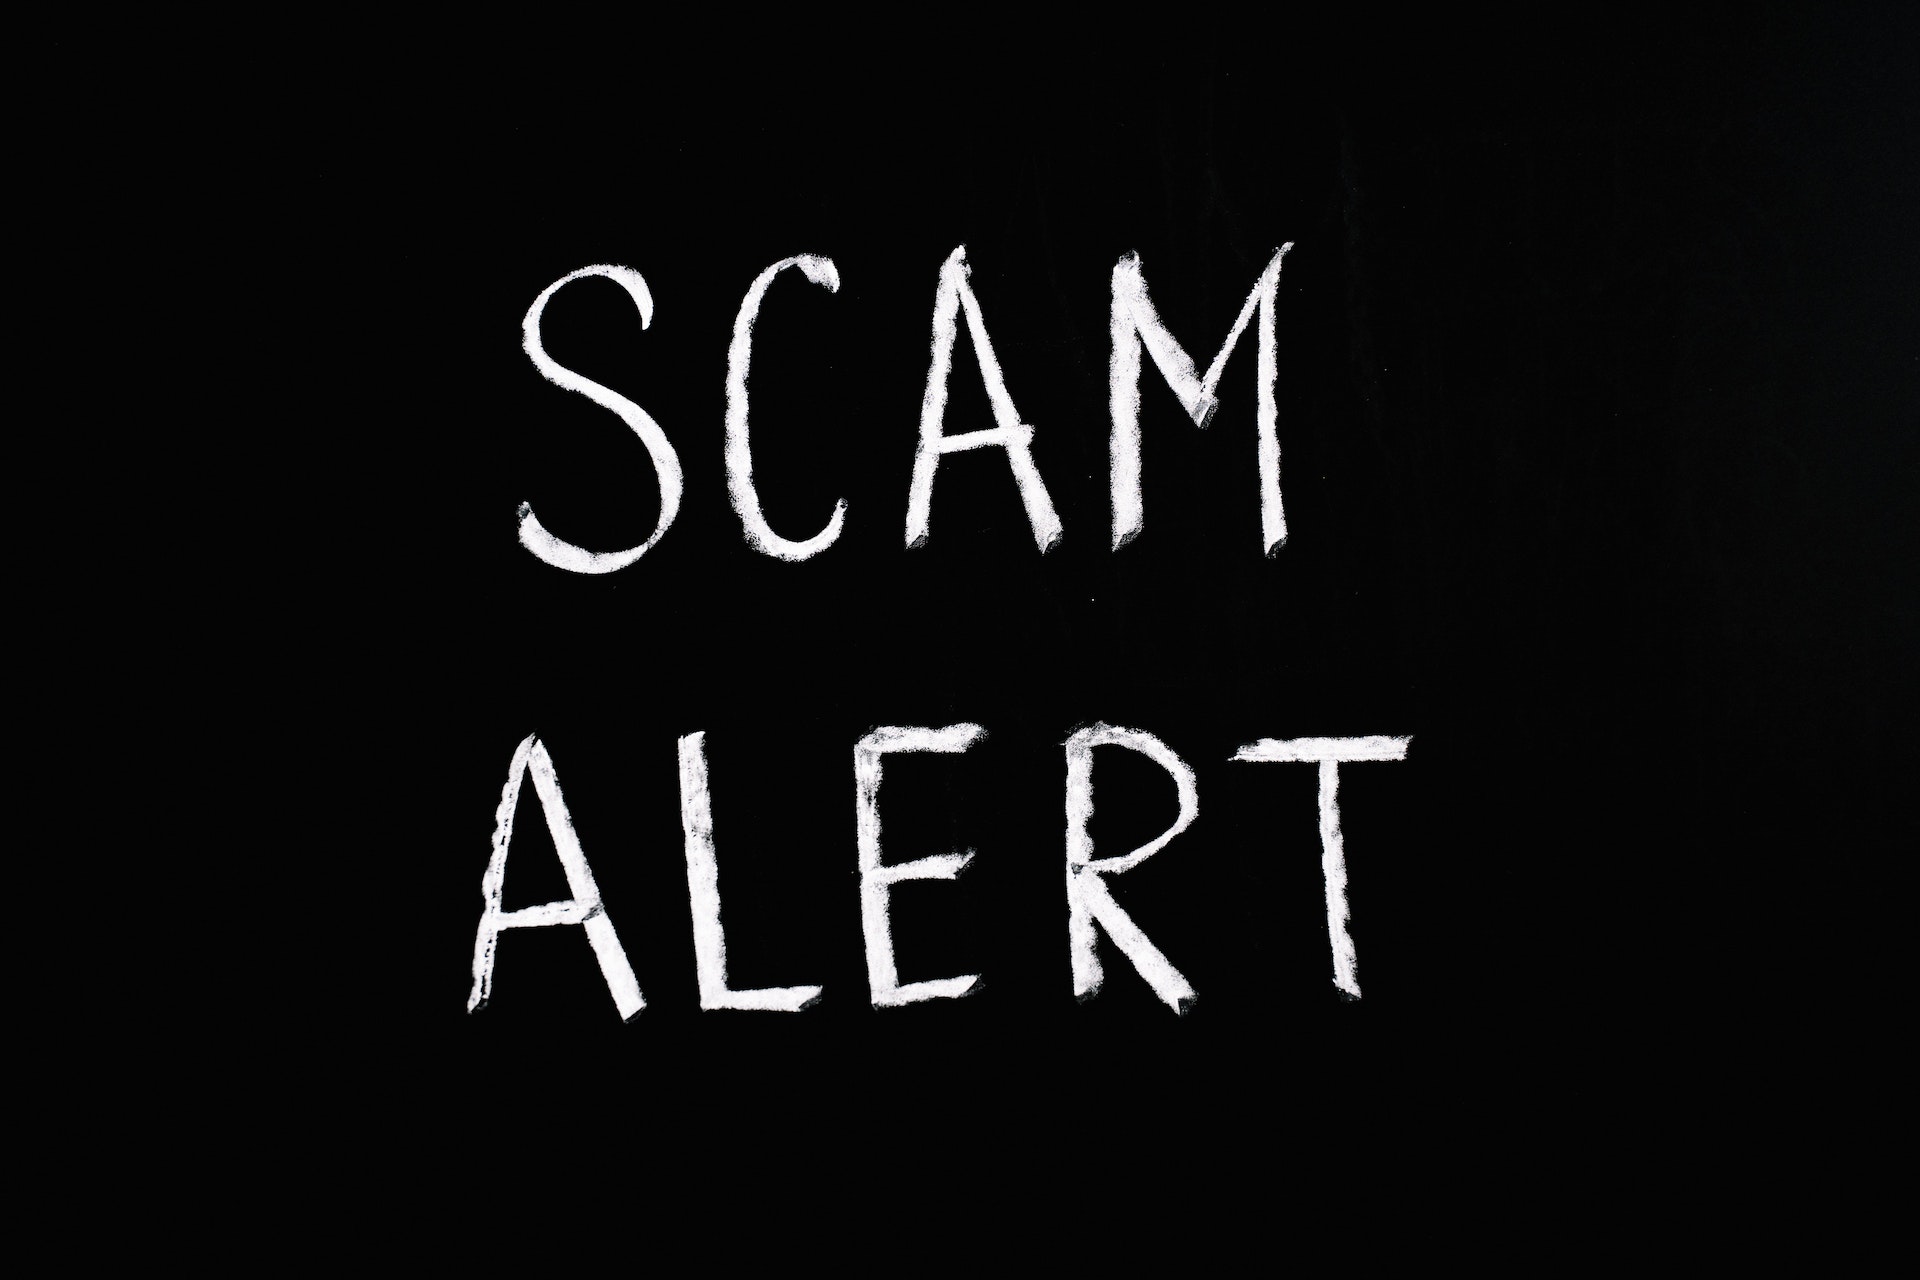 This image reads scam alert as a warning to landlords about possible rental scams in the UK.